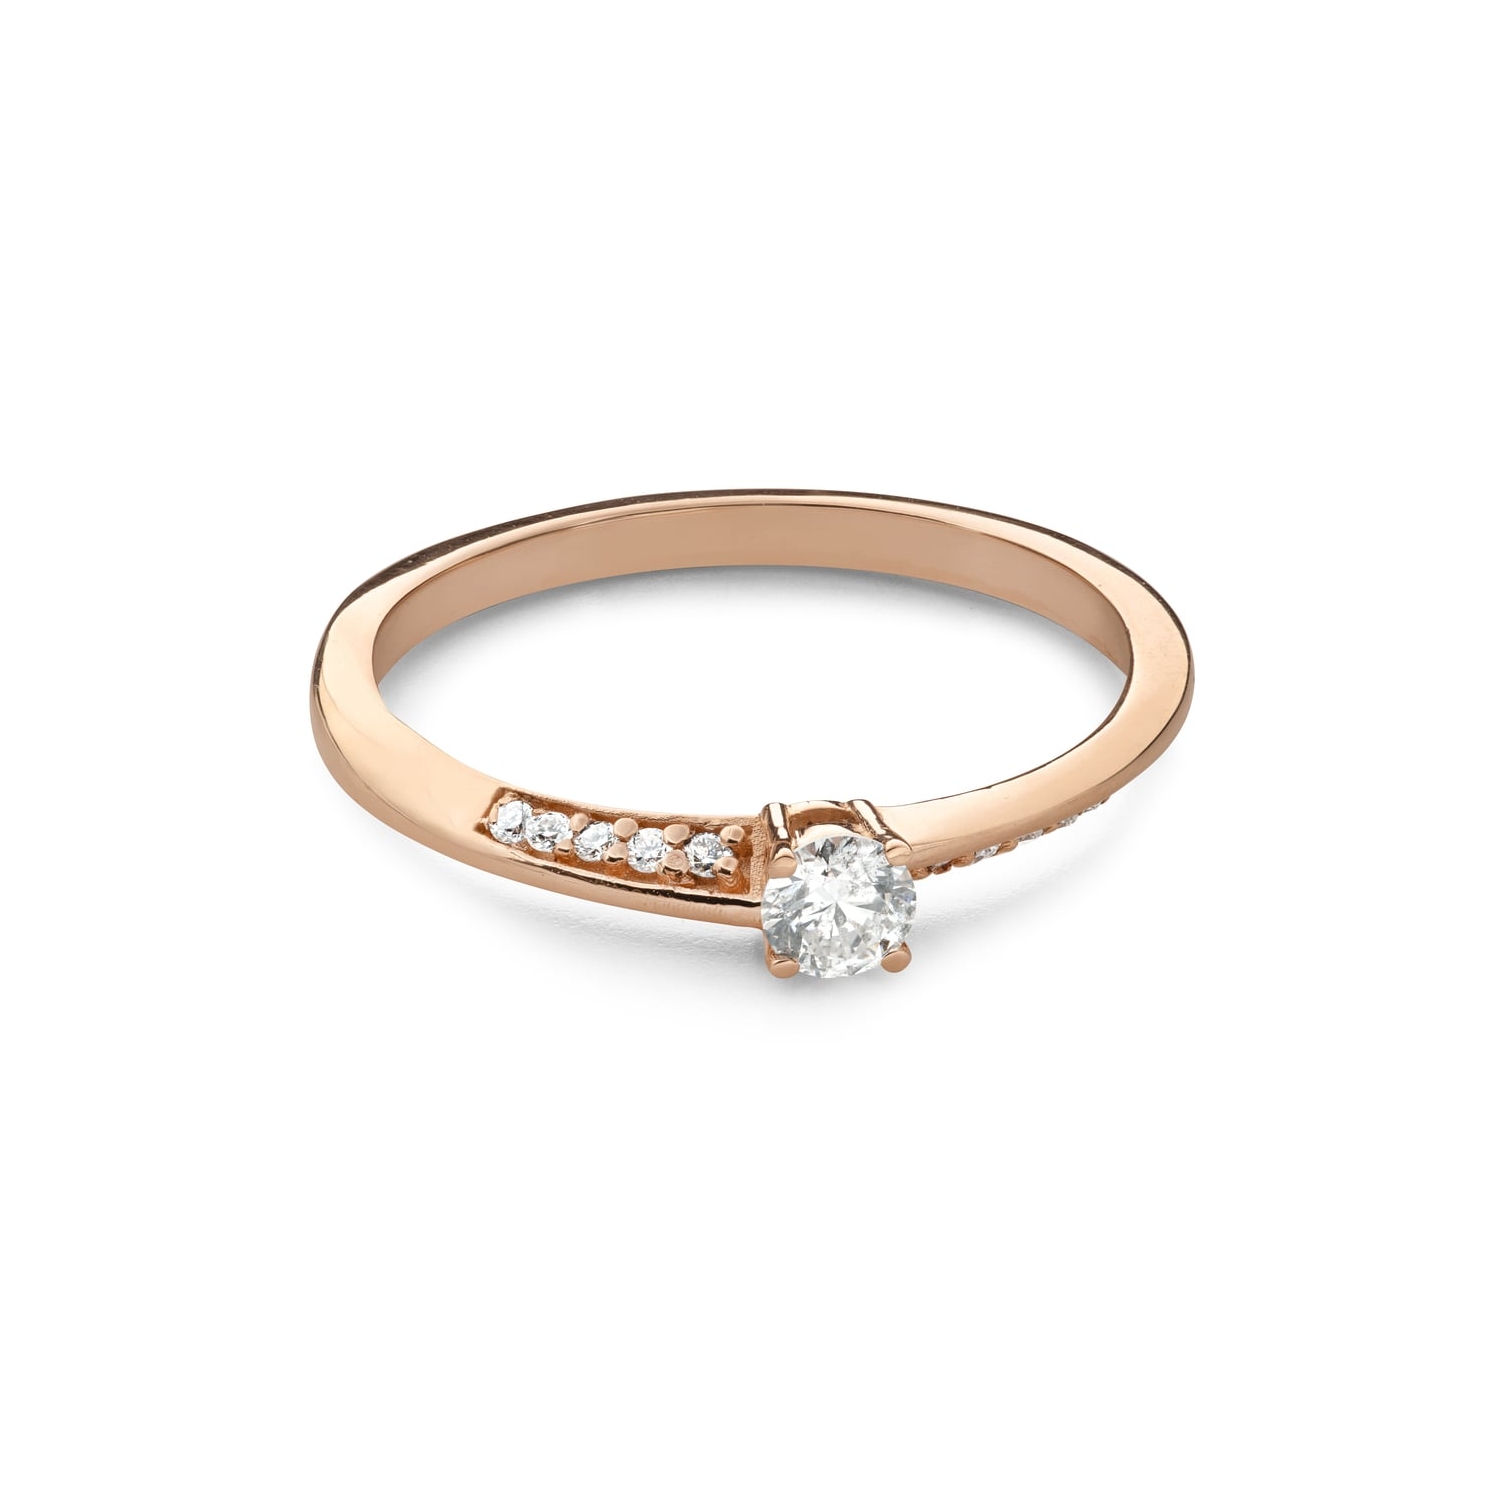 Engagment ring with brilliants "In love 148"